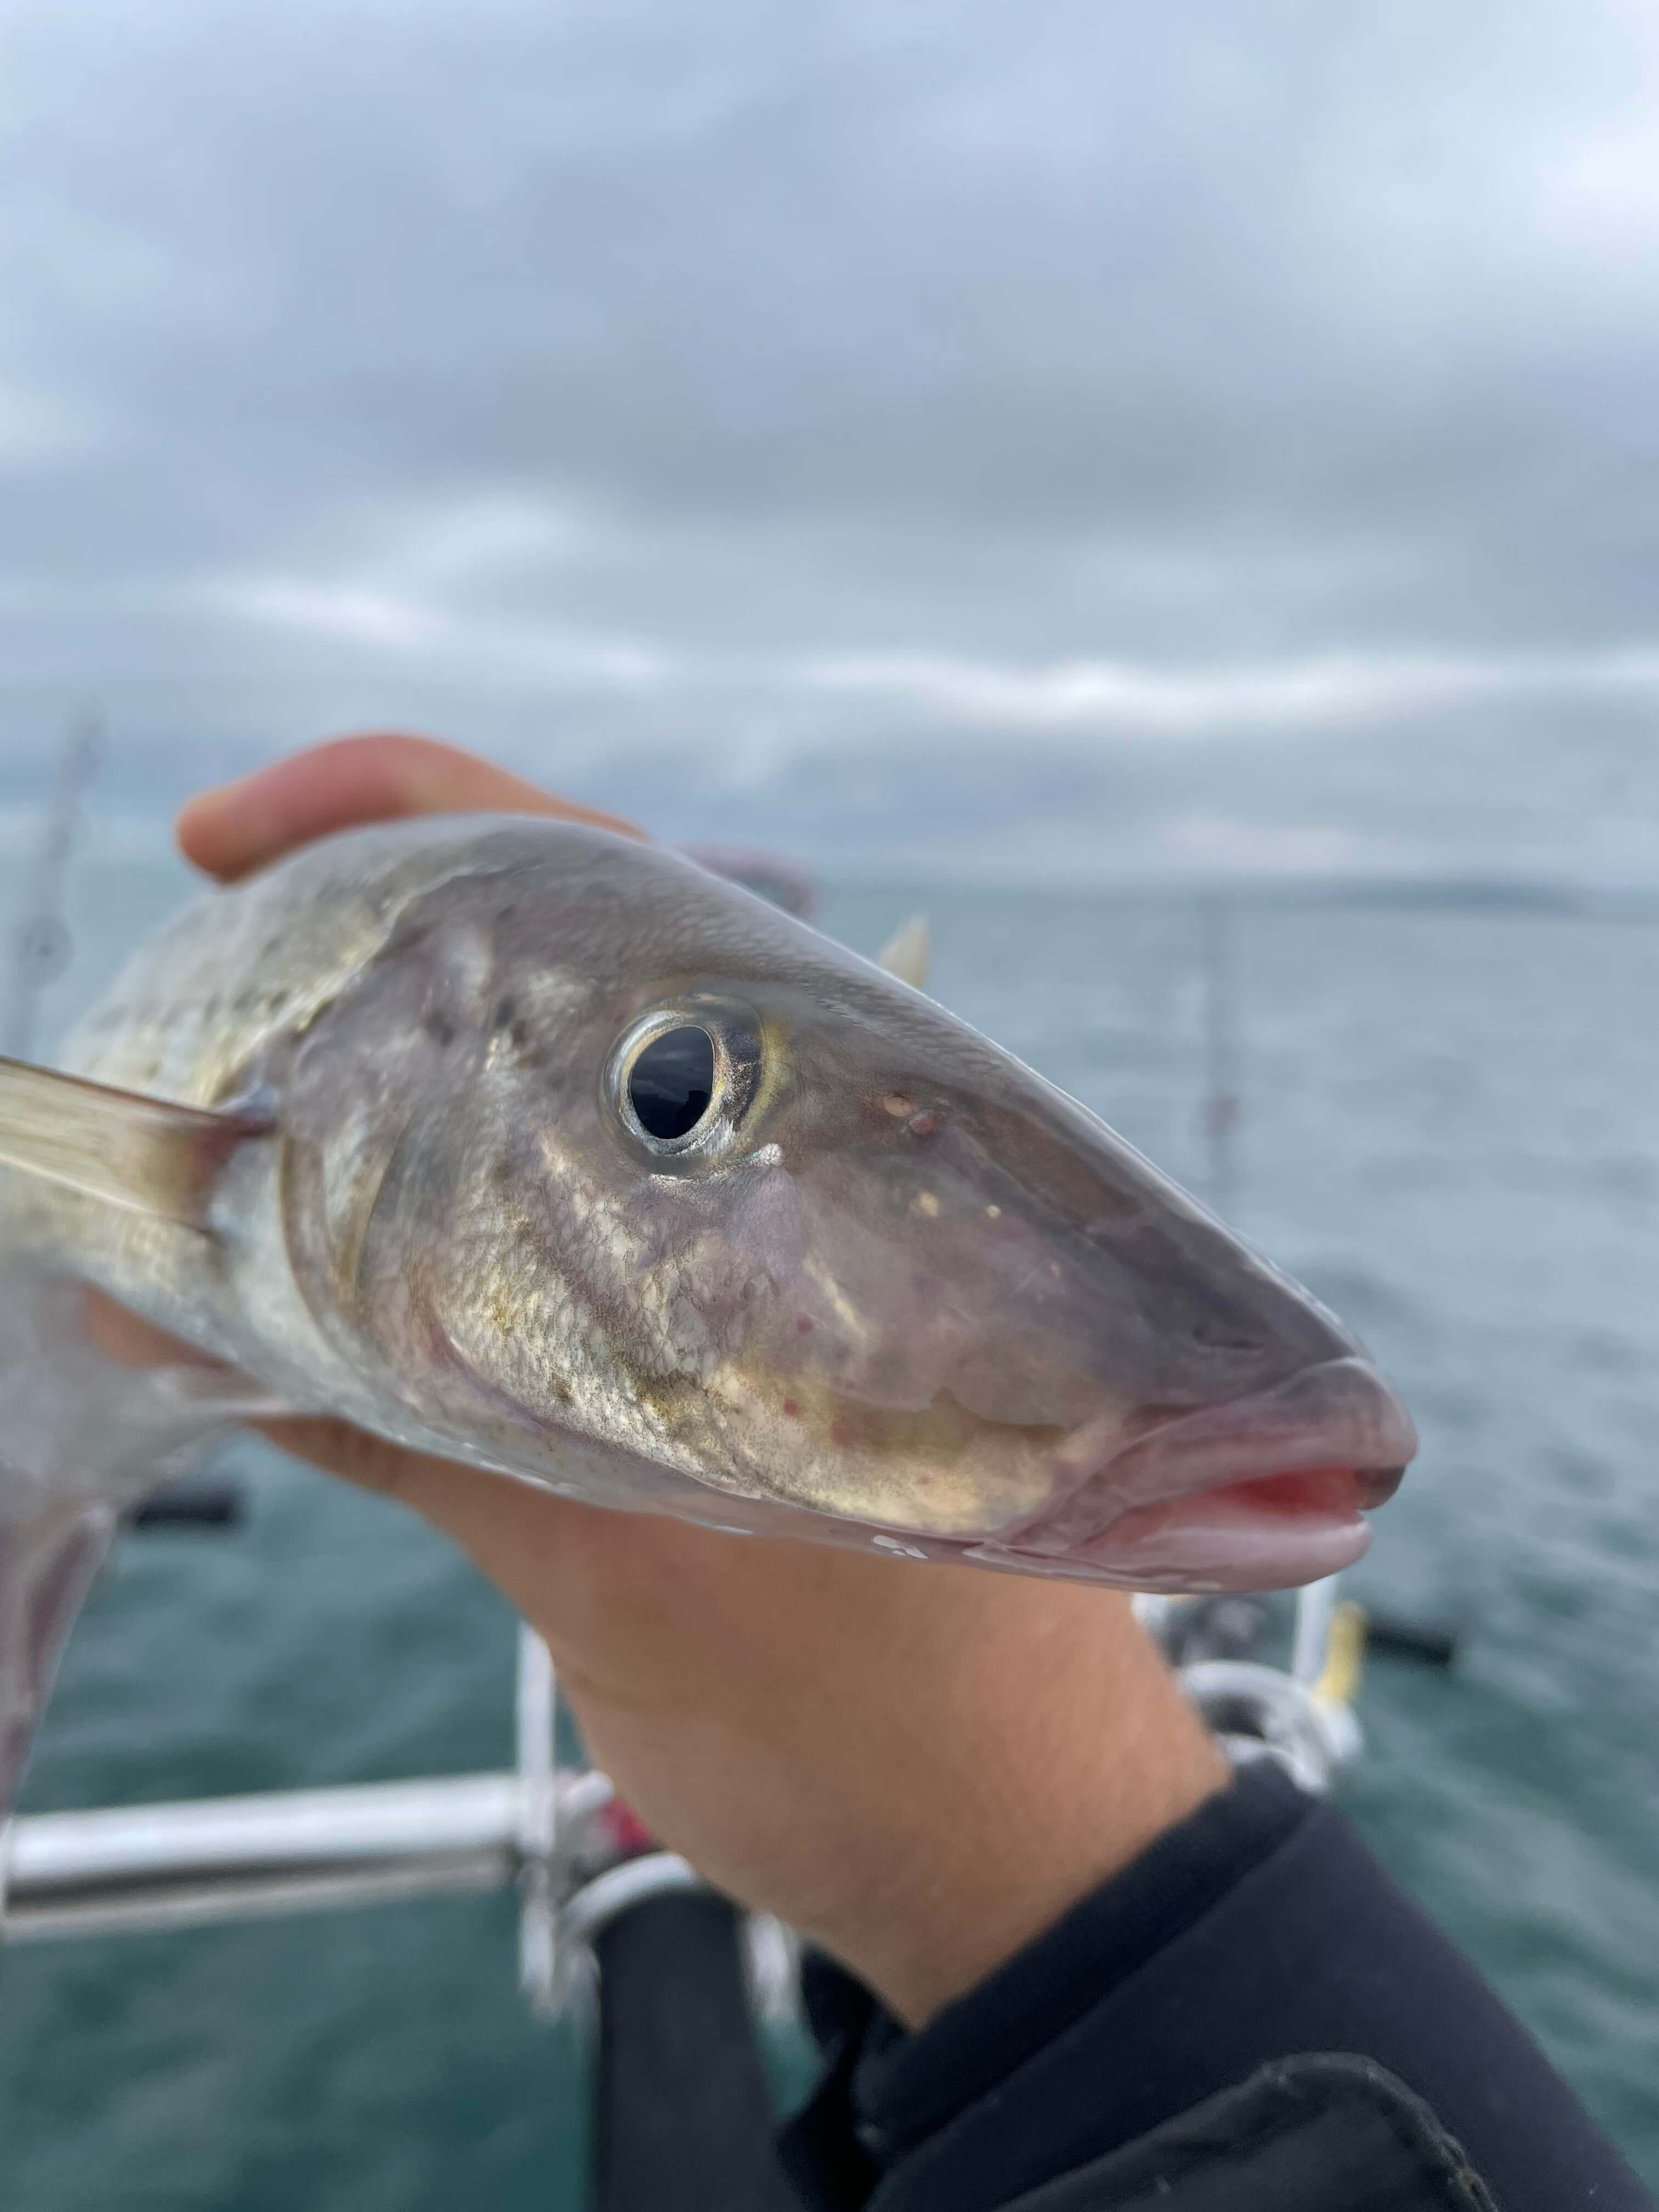 King George Whiting Mouth